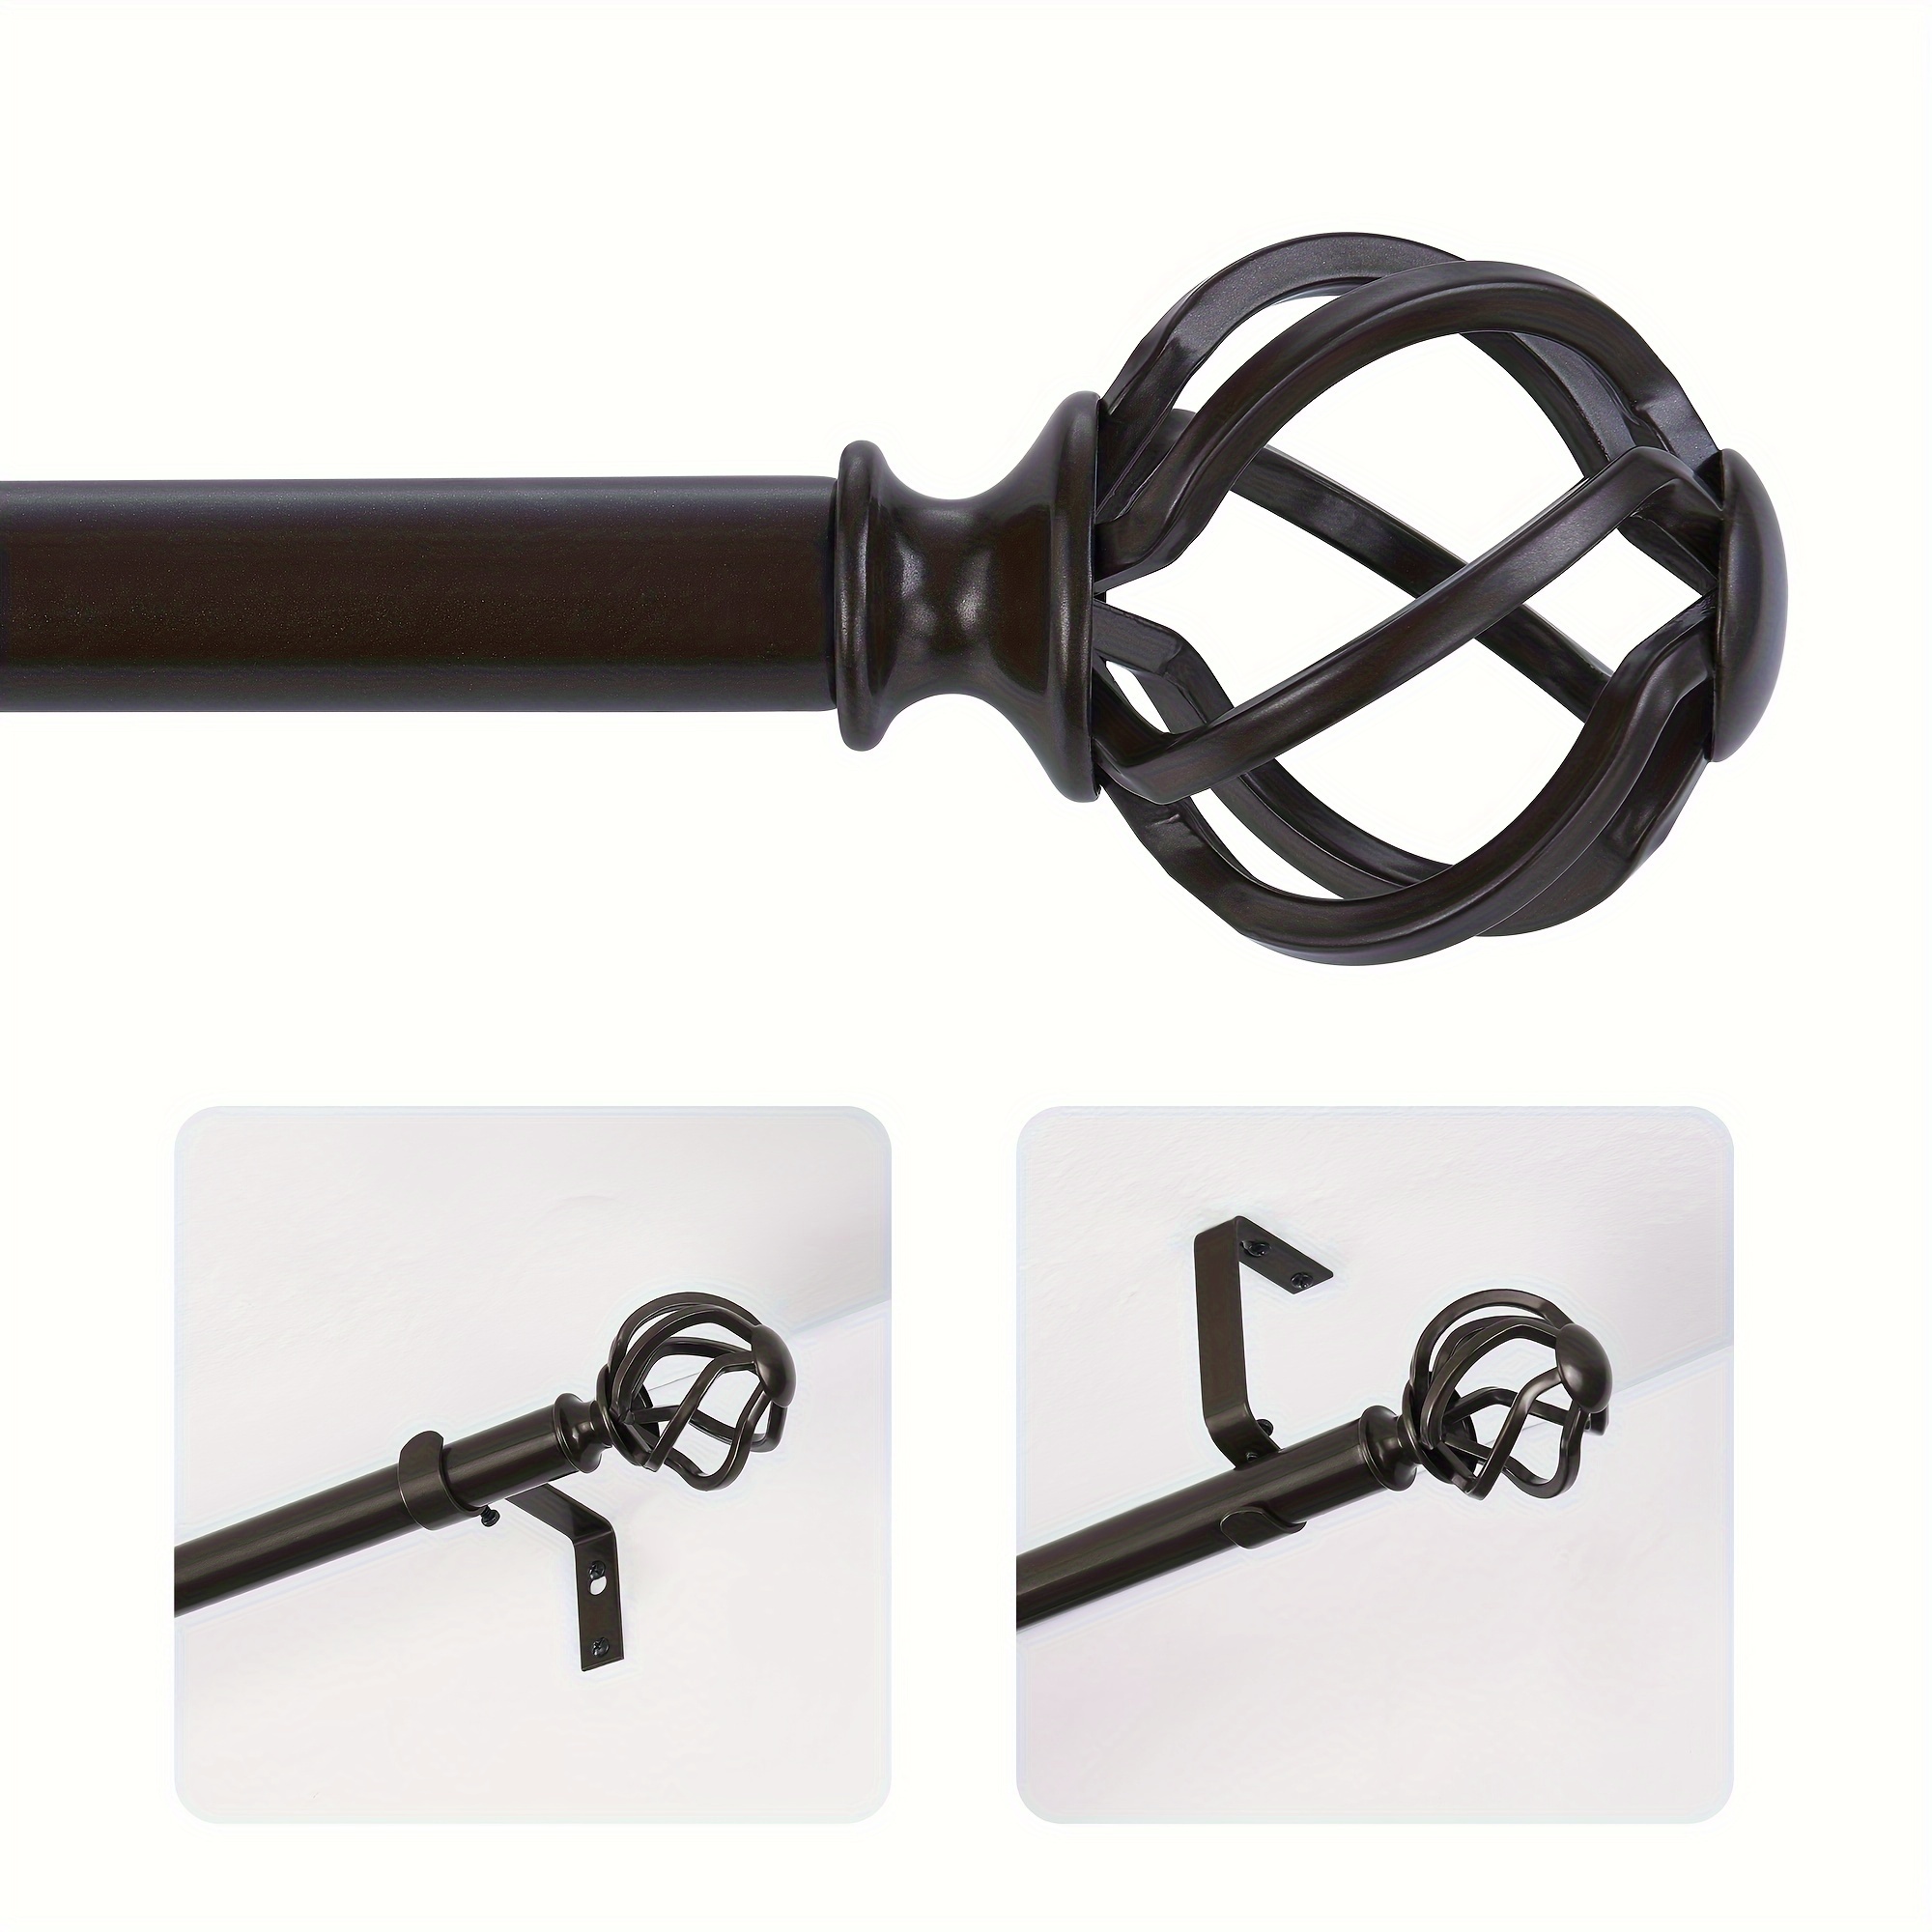 

Black Curtain Rod For 72-144 Inch Window: 1 Inch Adjustable Long With Twisted Cage Finials - Rustic Rods For Outdoors & Indoors With Ceiling & Wall Mounted